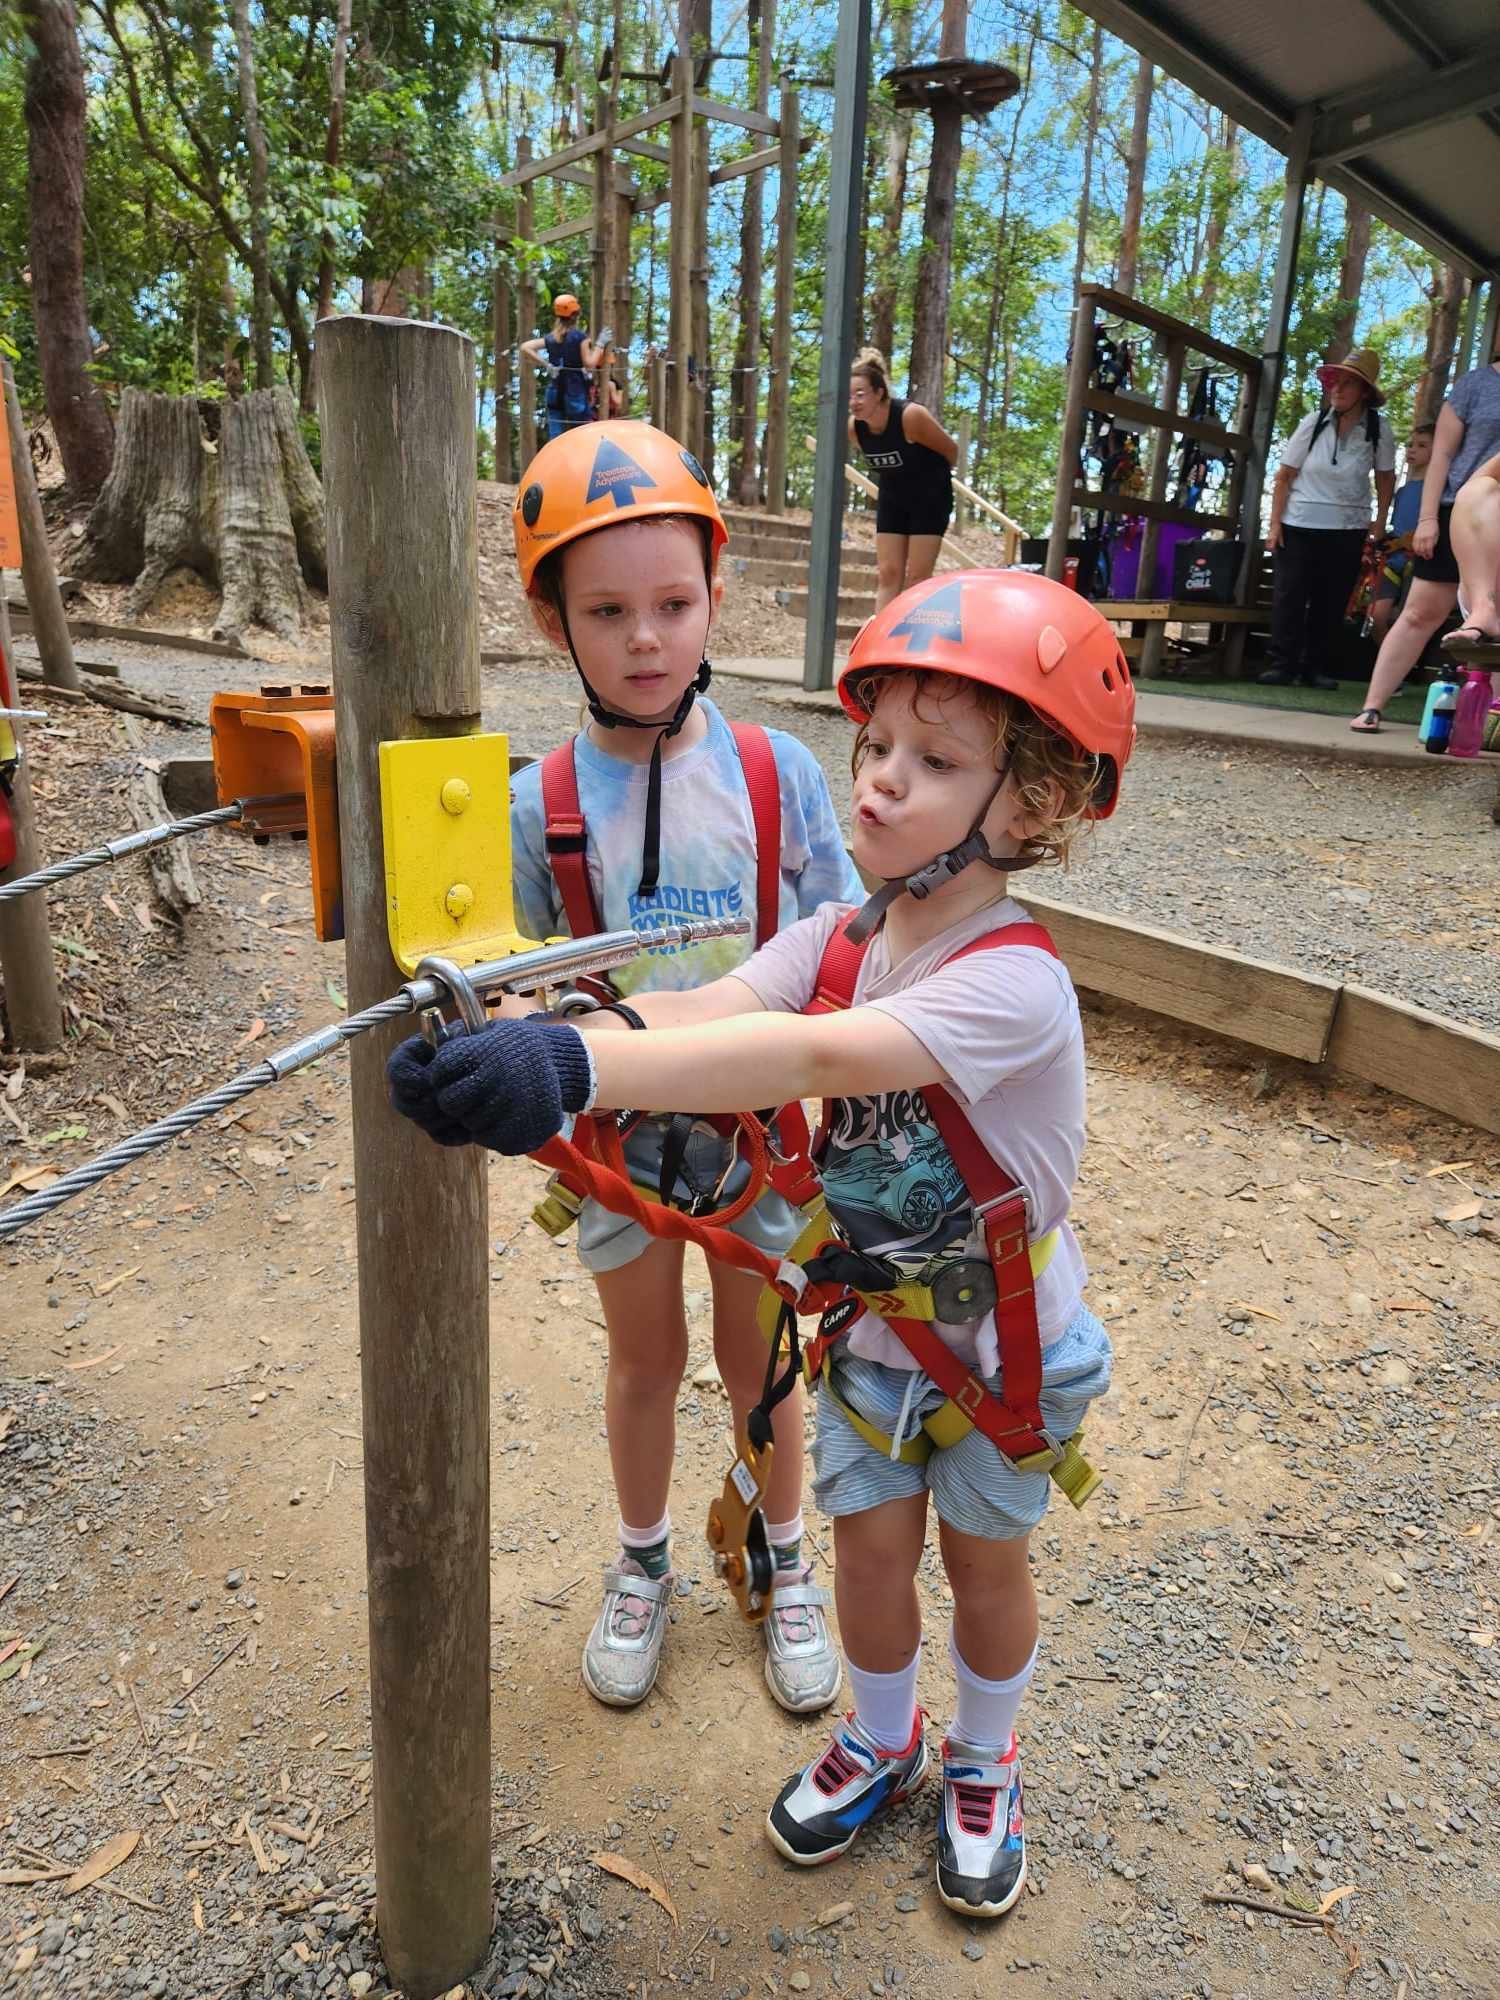 A 5 year old learning to use the safety gear at Treetops Coffs